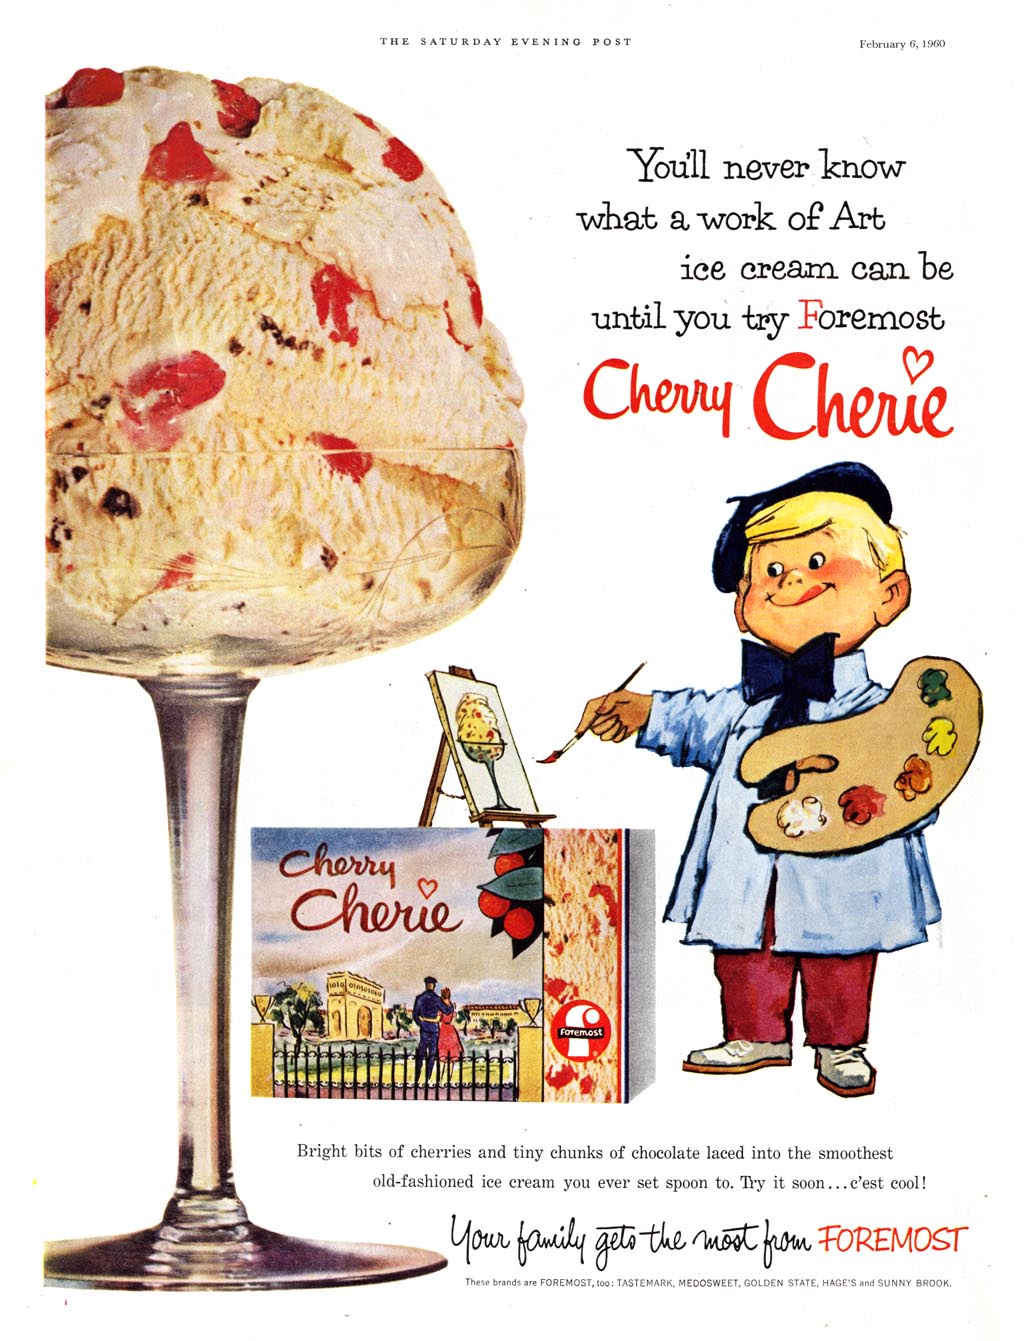 Foremost Cherry Cherie ice cream - published in The Saturday Evening Post - February 6, 1960